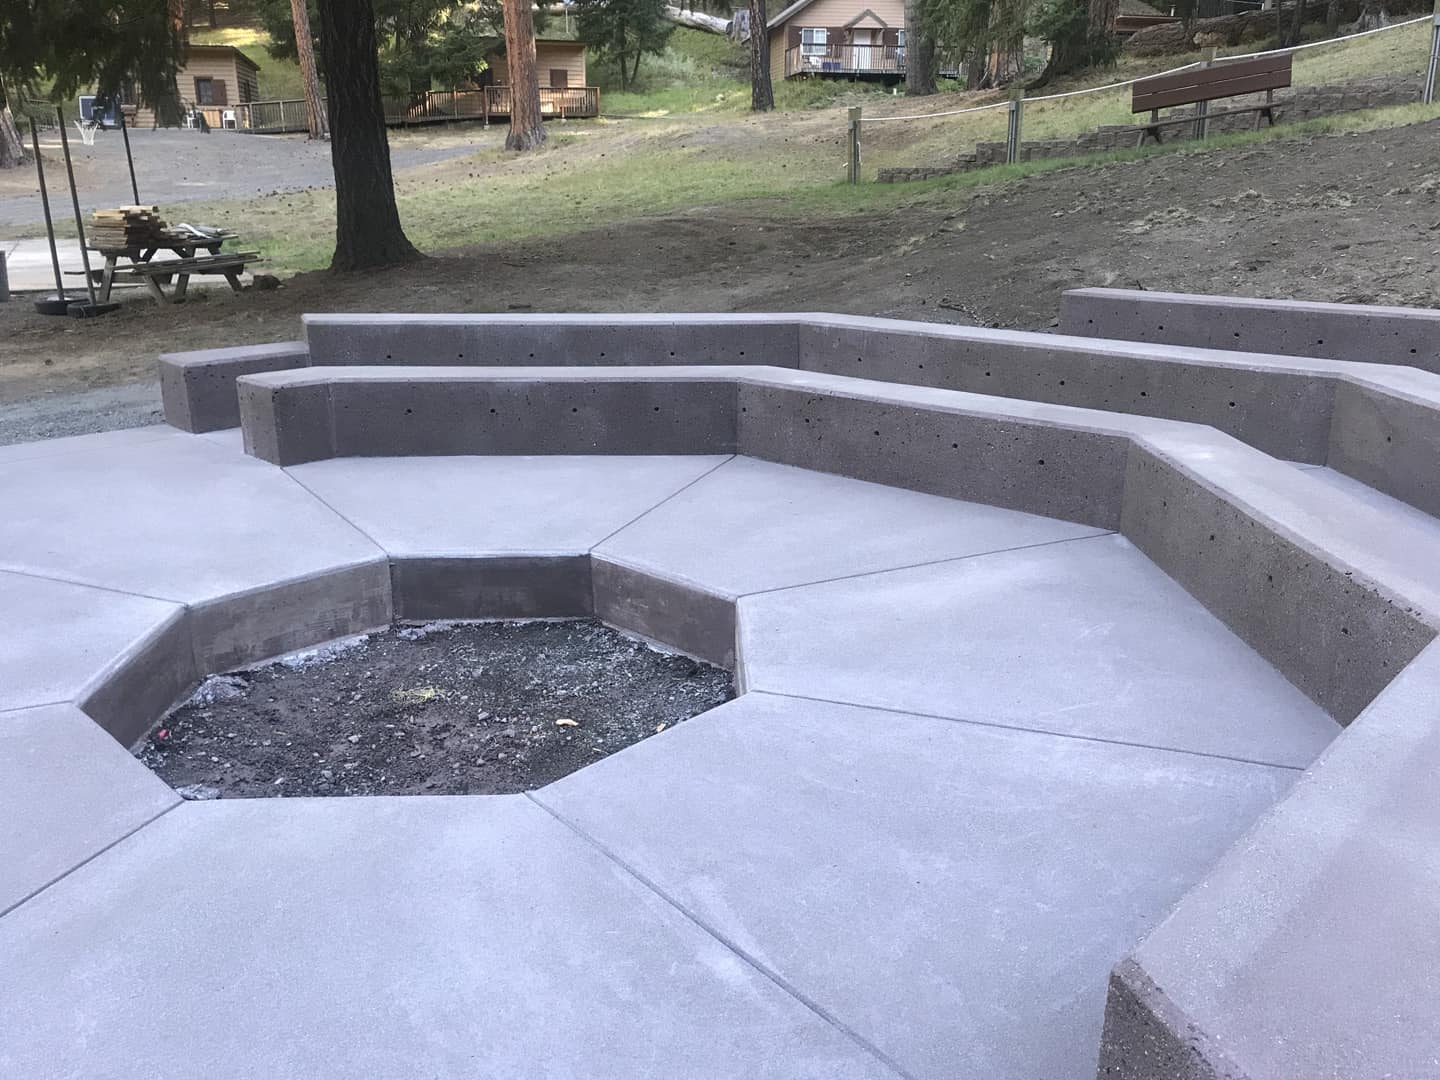 Concrete fire pit and seating area